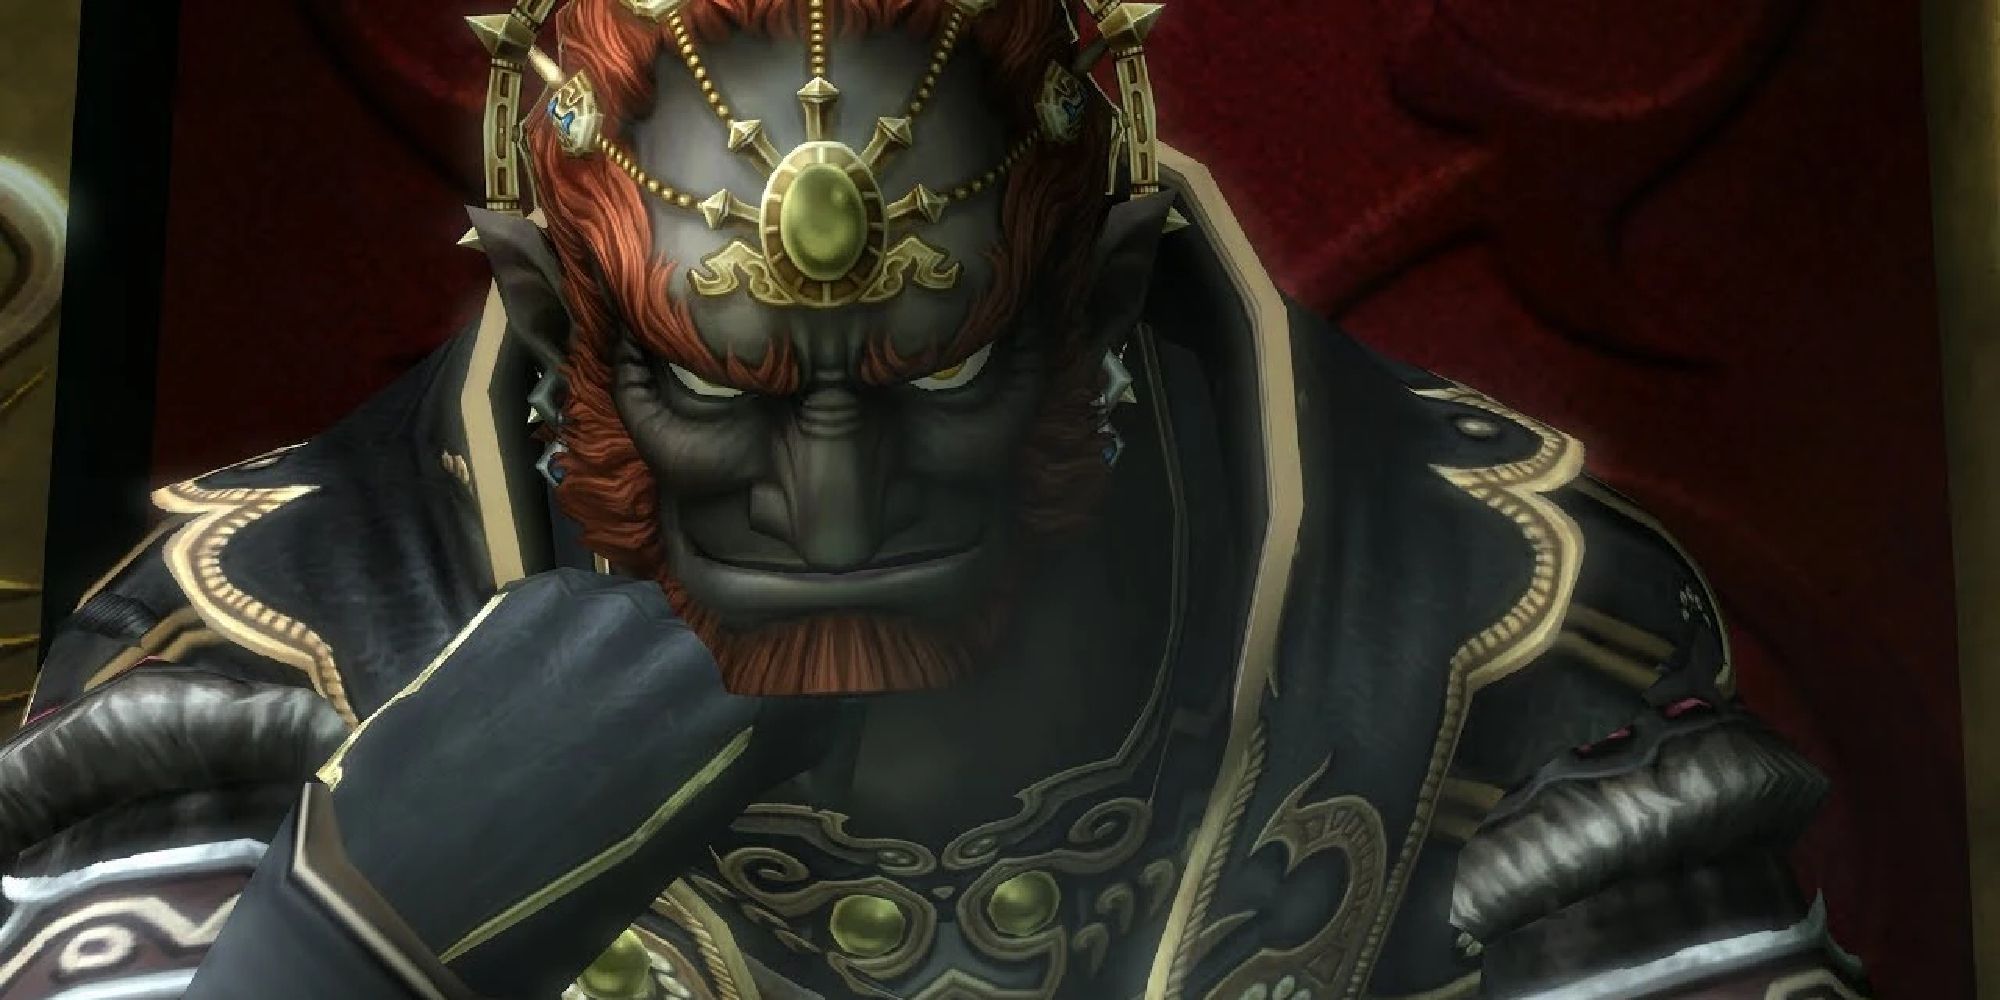 Ganondorf sits on a regal throne, chin resting on one hand with a wicked grin on his face. 